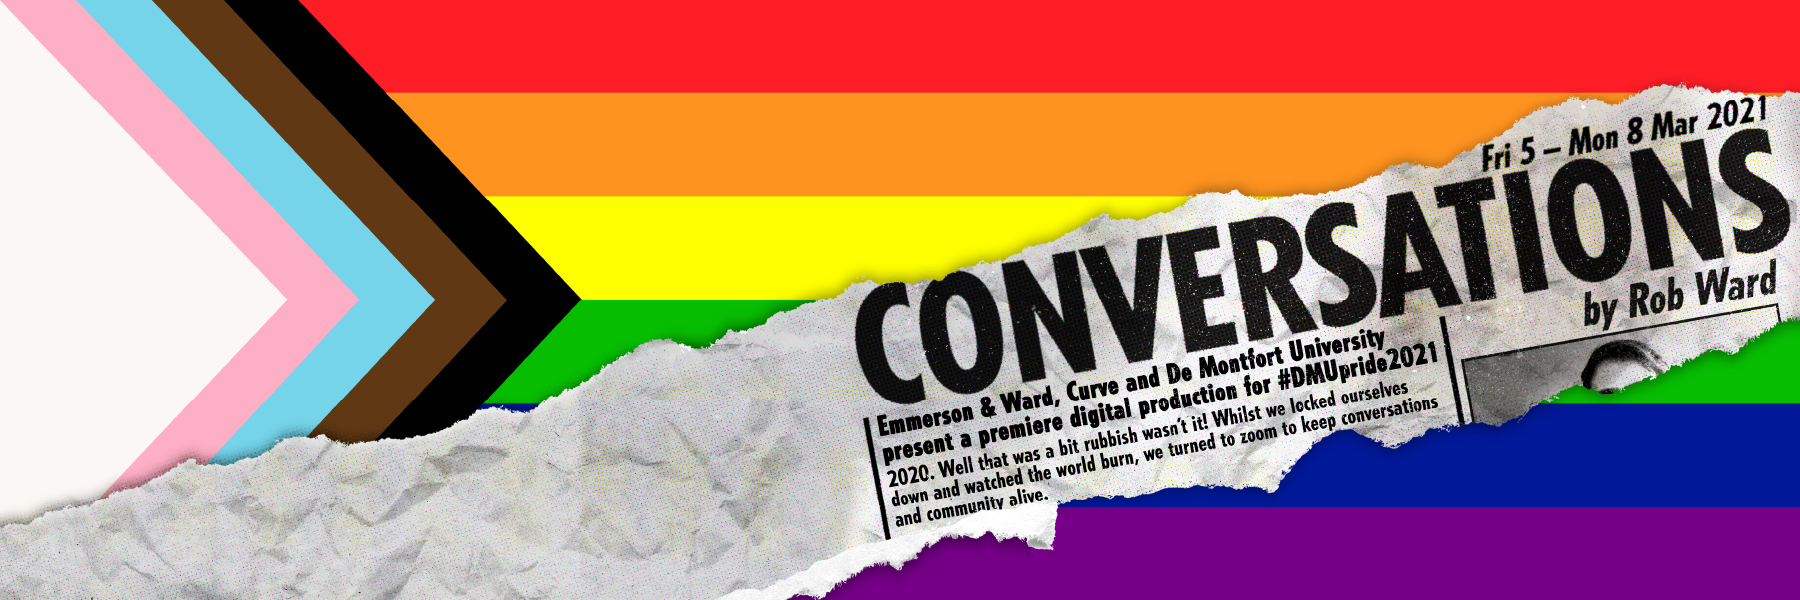 Promotional artwork for Conversations. A torn newspaper strip reads 'Conversations' above an LGBTQ+ Pride Flag.